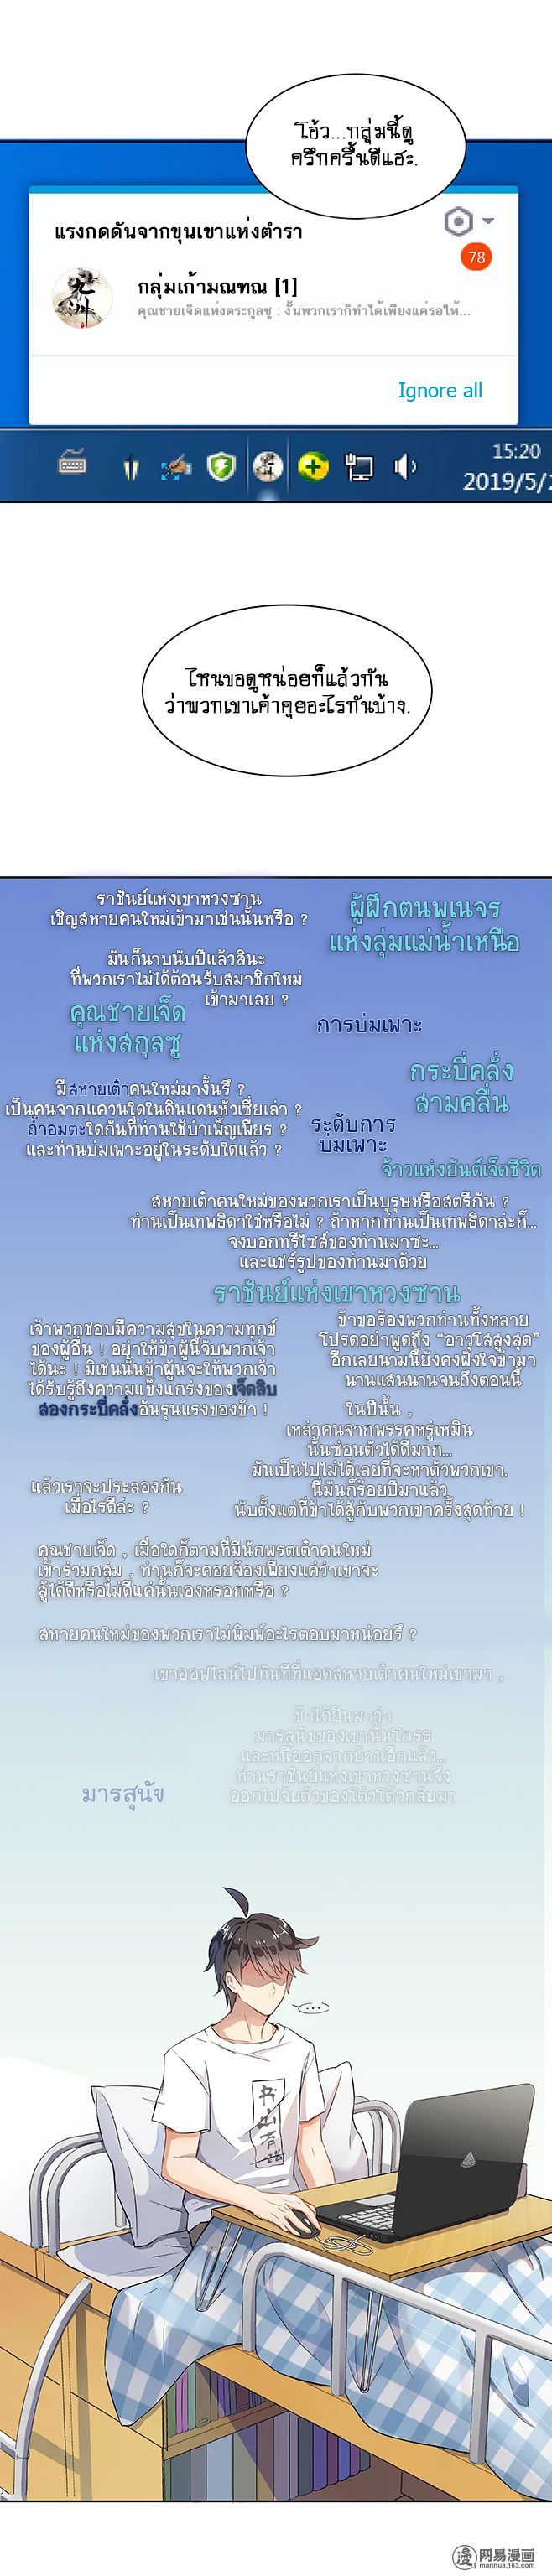 Cultivation Chat Group - หน้า 11